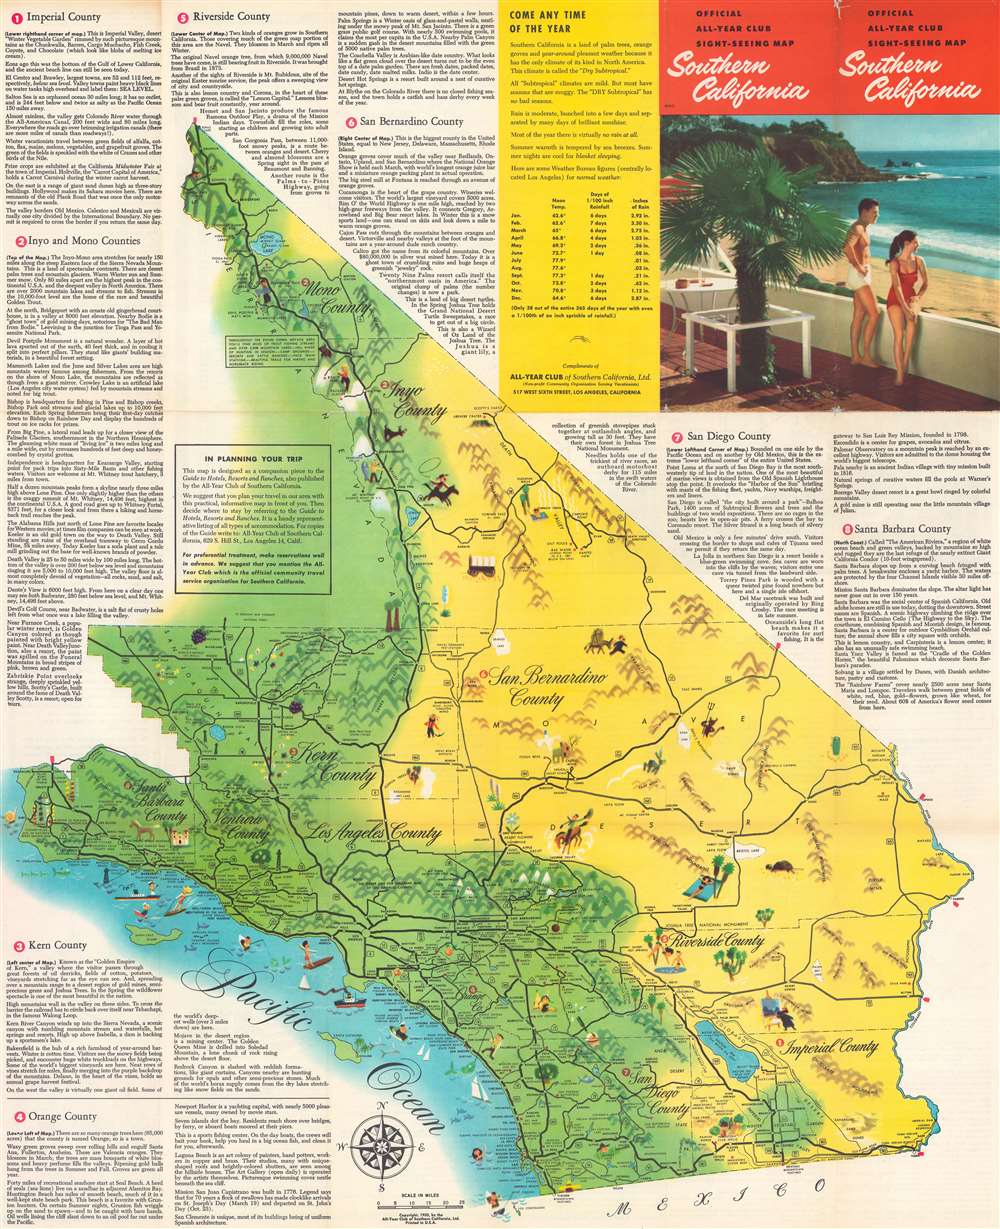 Official All-Year Club Sight-Seeing Map Southern California. - Main View